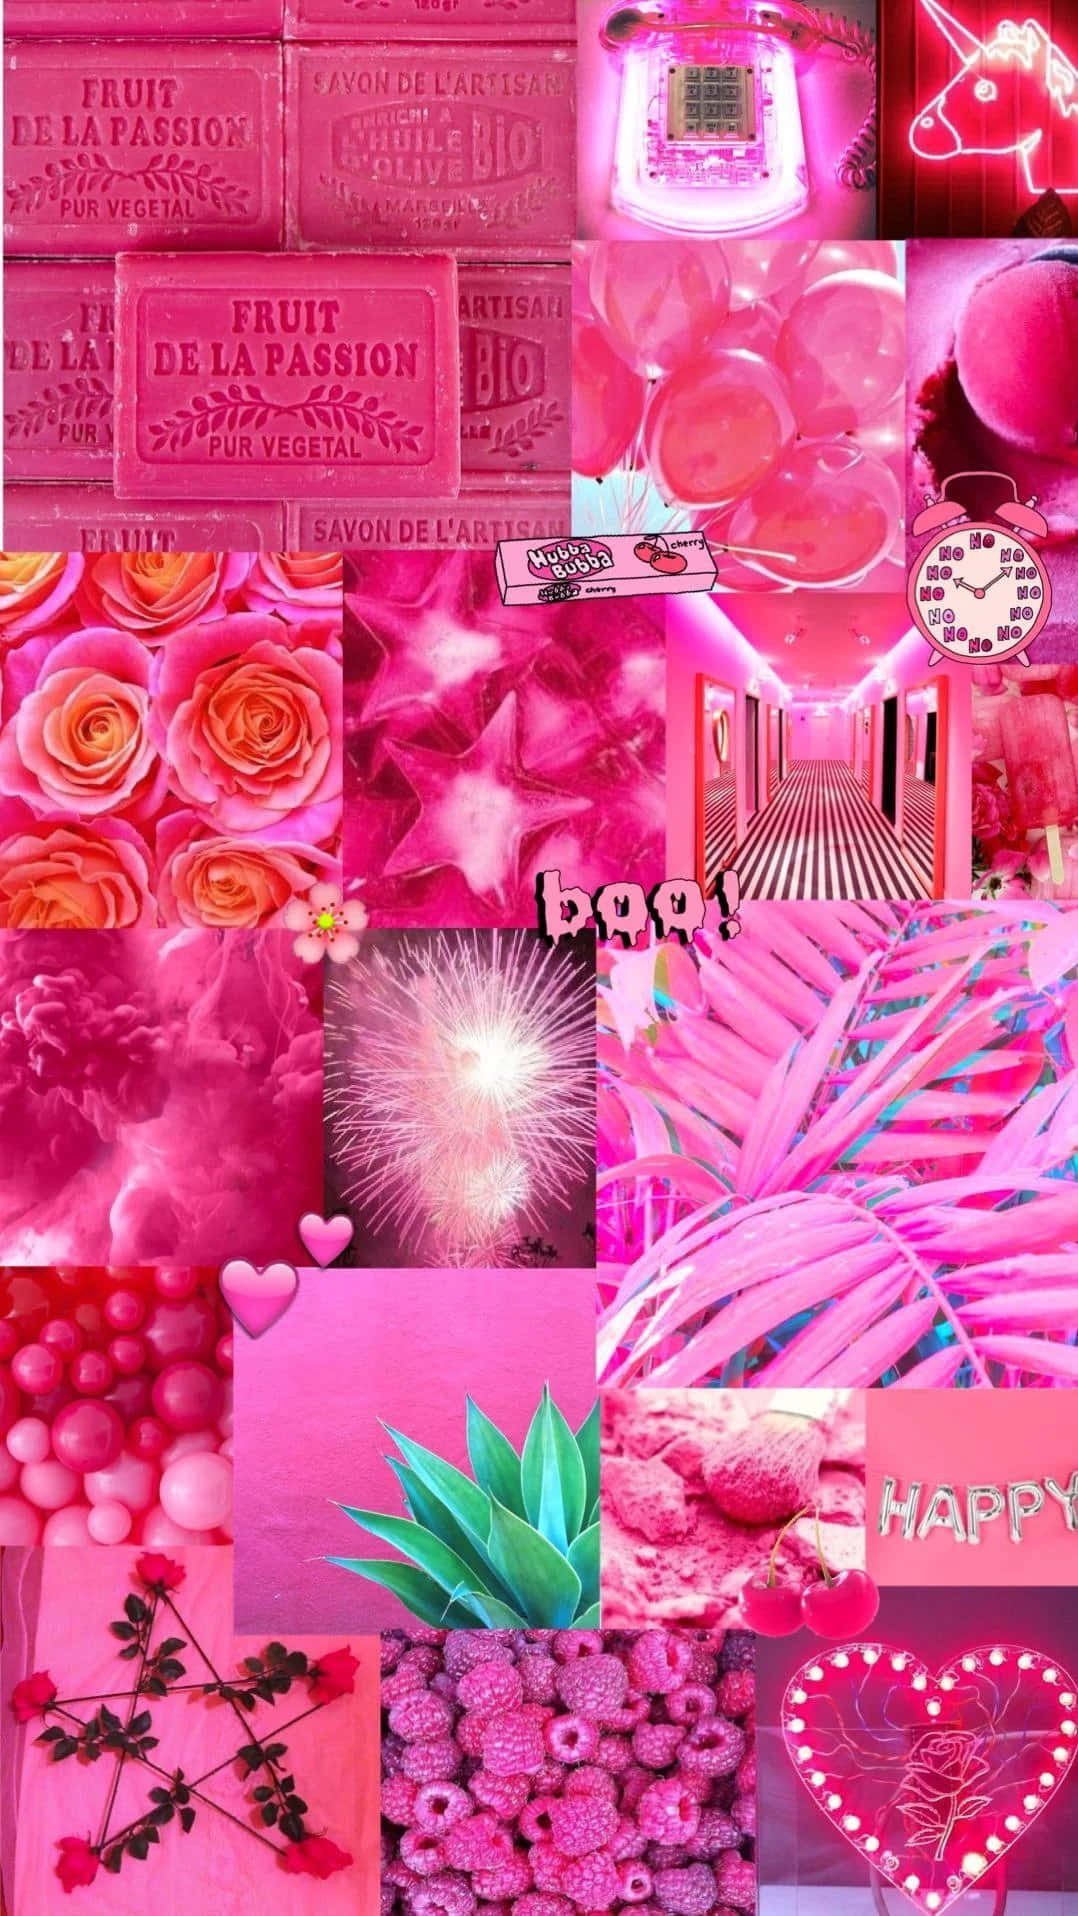 Brighten up your day with this vibrant Neon Pink Aesthetic!